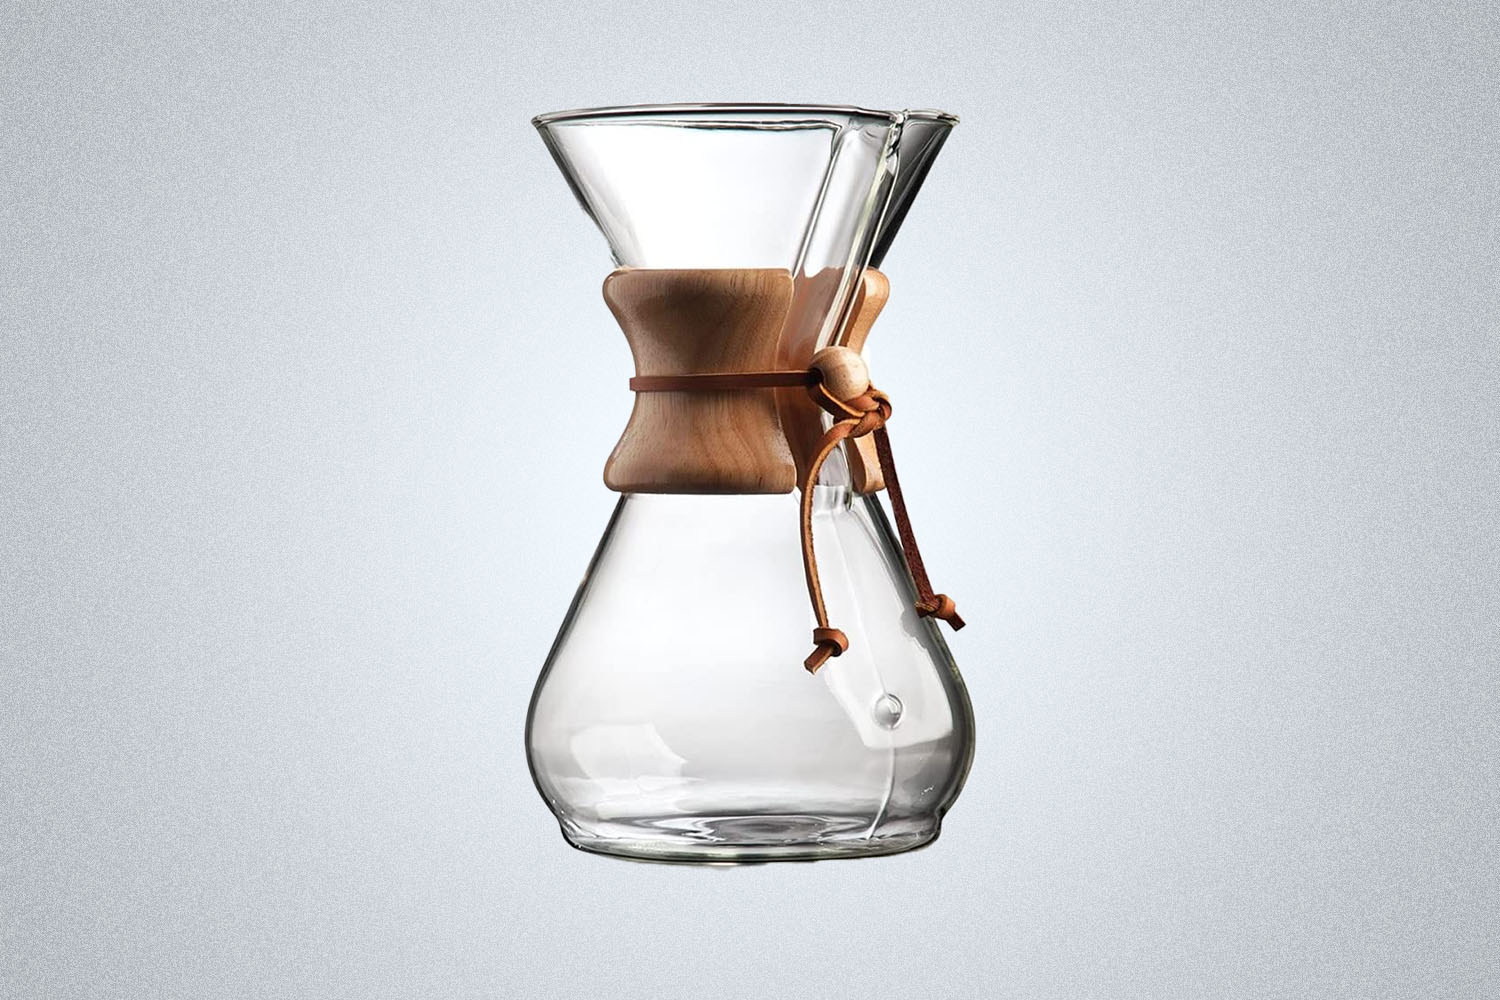 The Chemex Pour Over Coffee Maker on a gray background